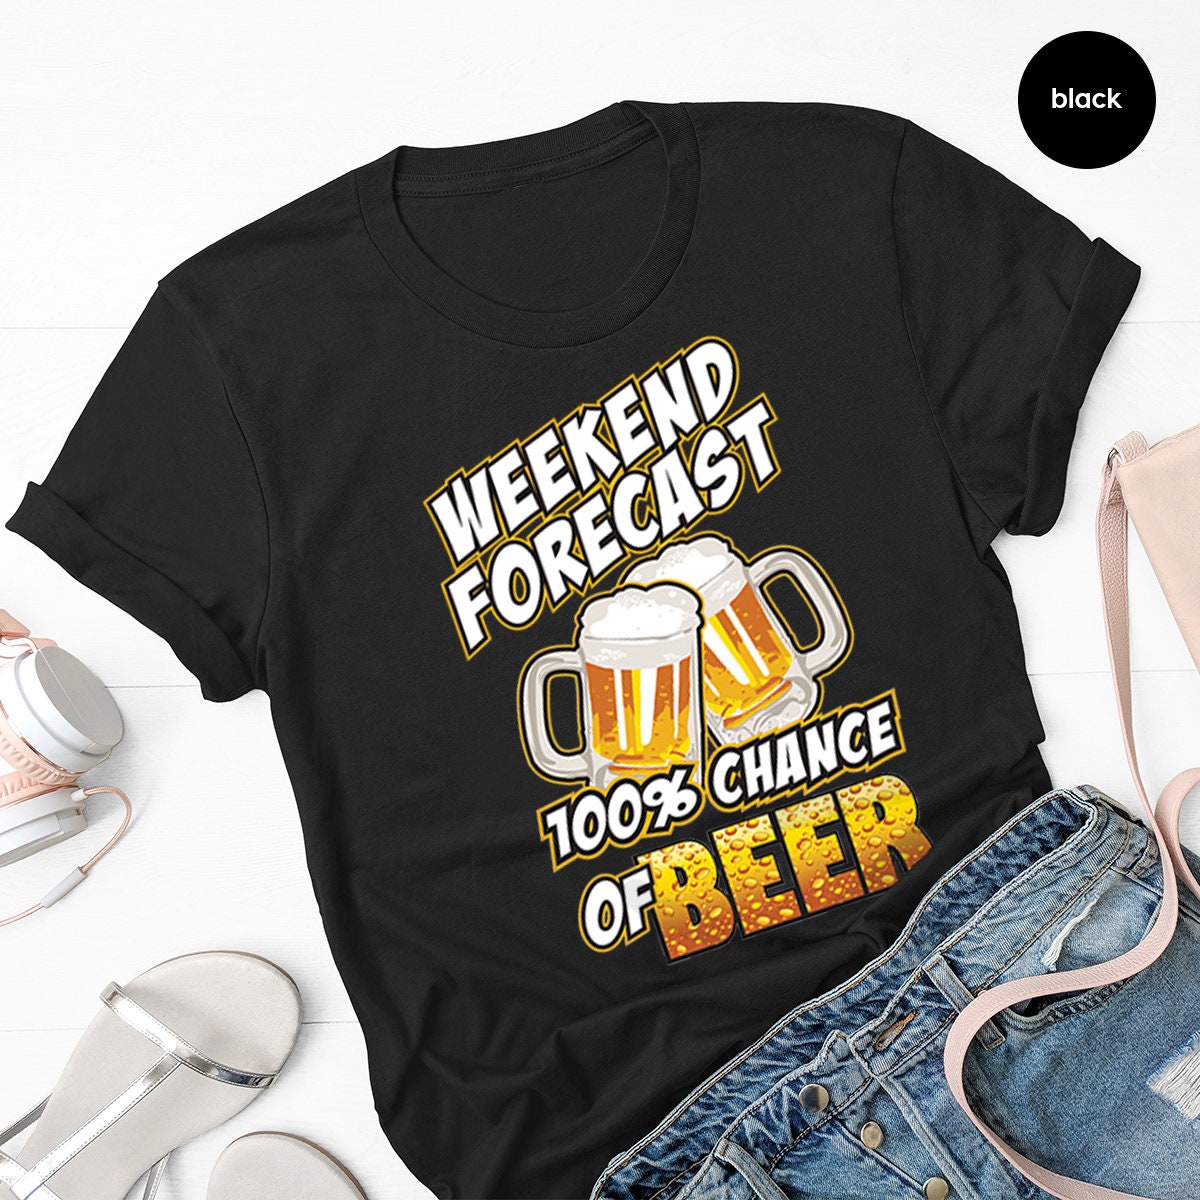 Beer Shirt, Day Drinking Shirt, Beer T Shirt, Funny Quote Shirt, Weekend Forecast Chance Of Beer Shirt, Alcohol Shirt, Bachelor Party Shirt - Fastdeliverytees.com